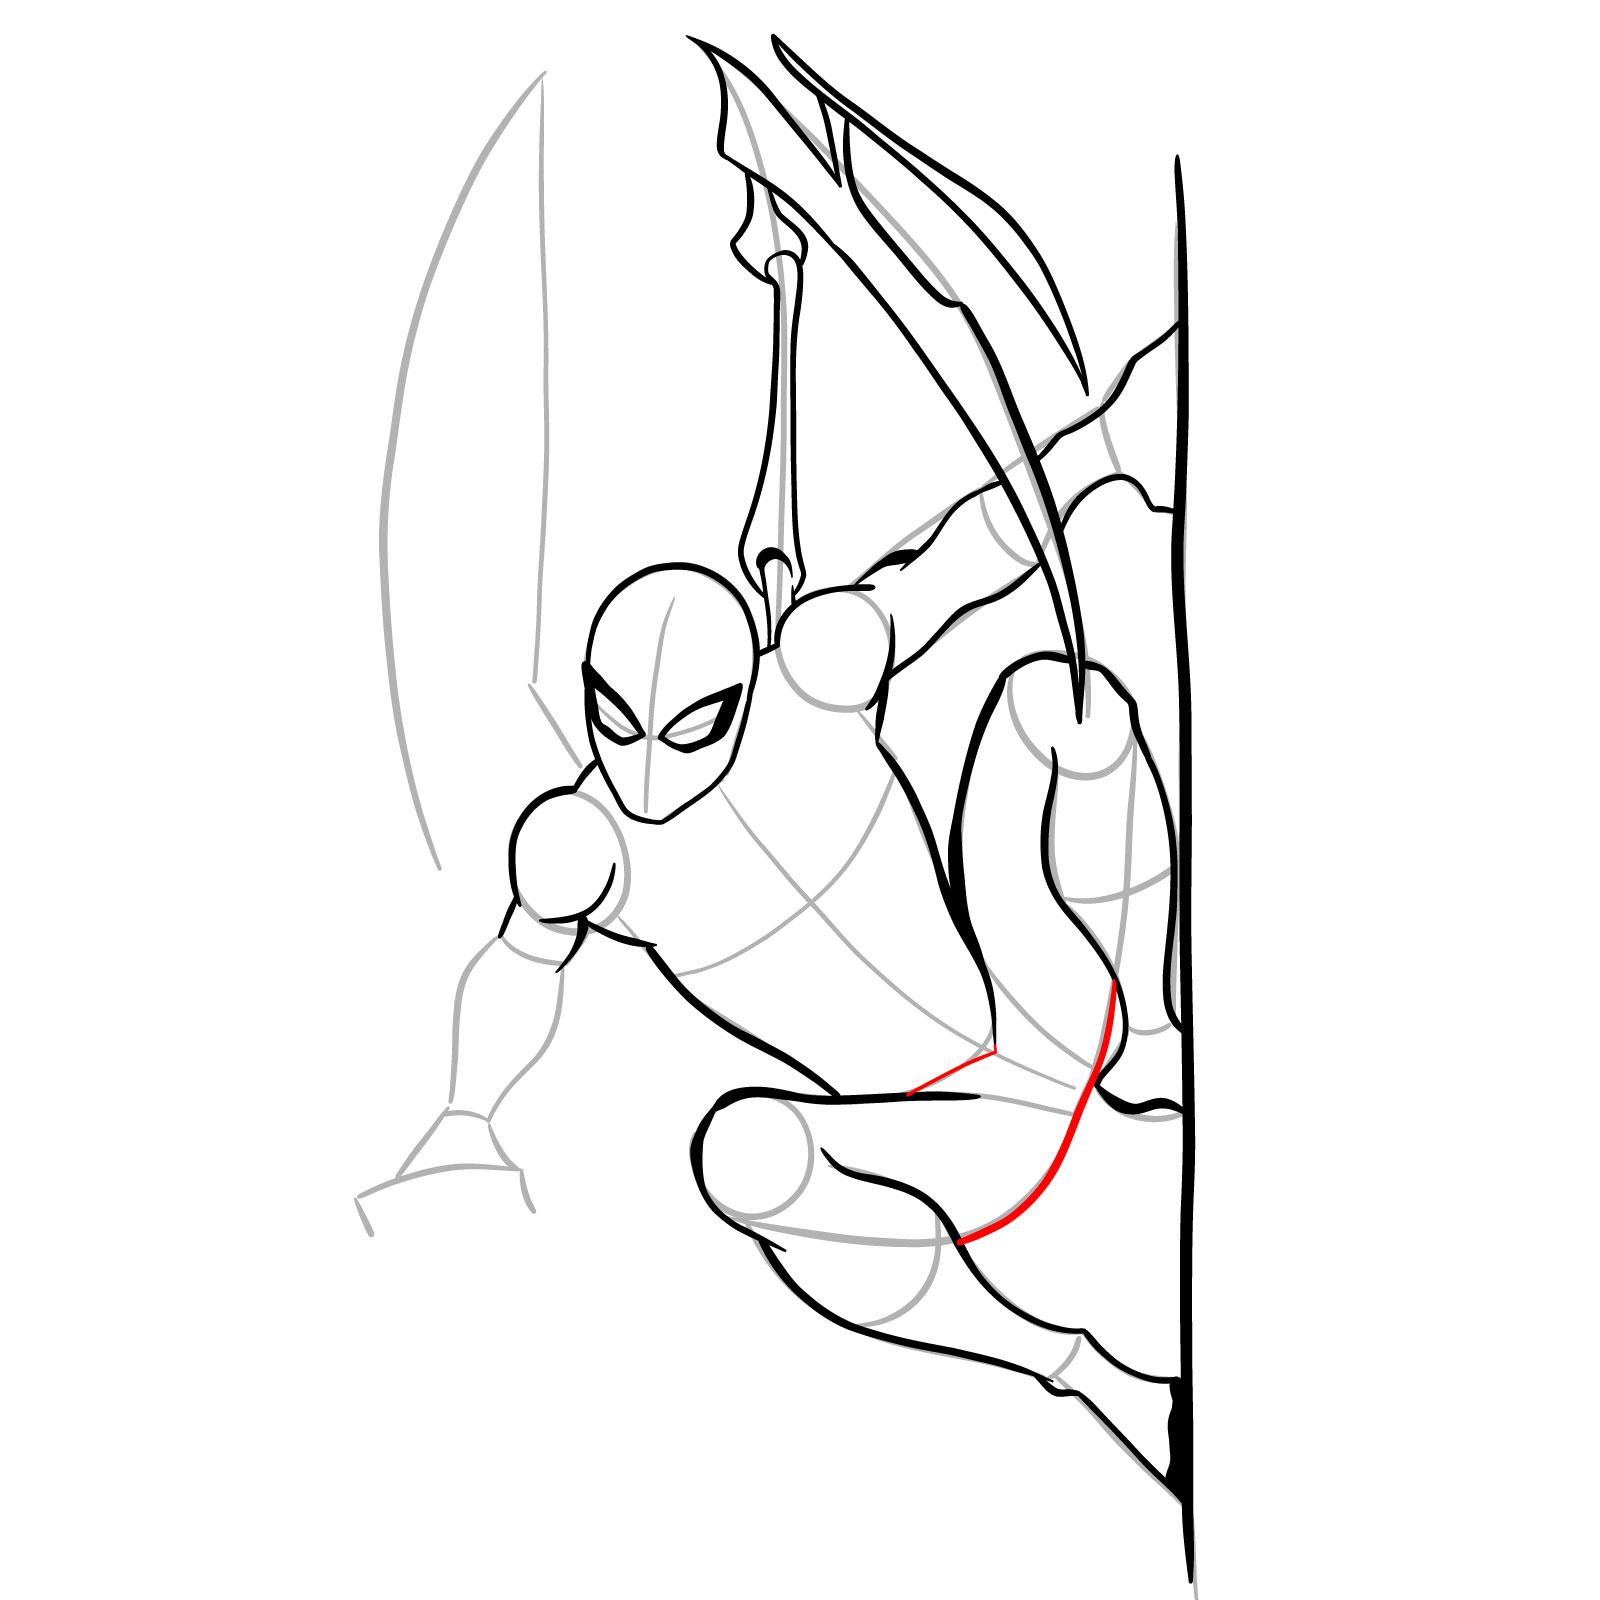 How to draw The Superior Spider-Man - step 22